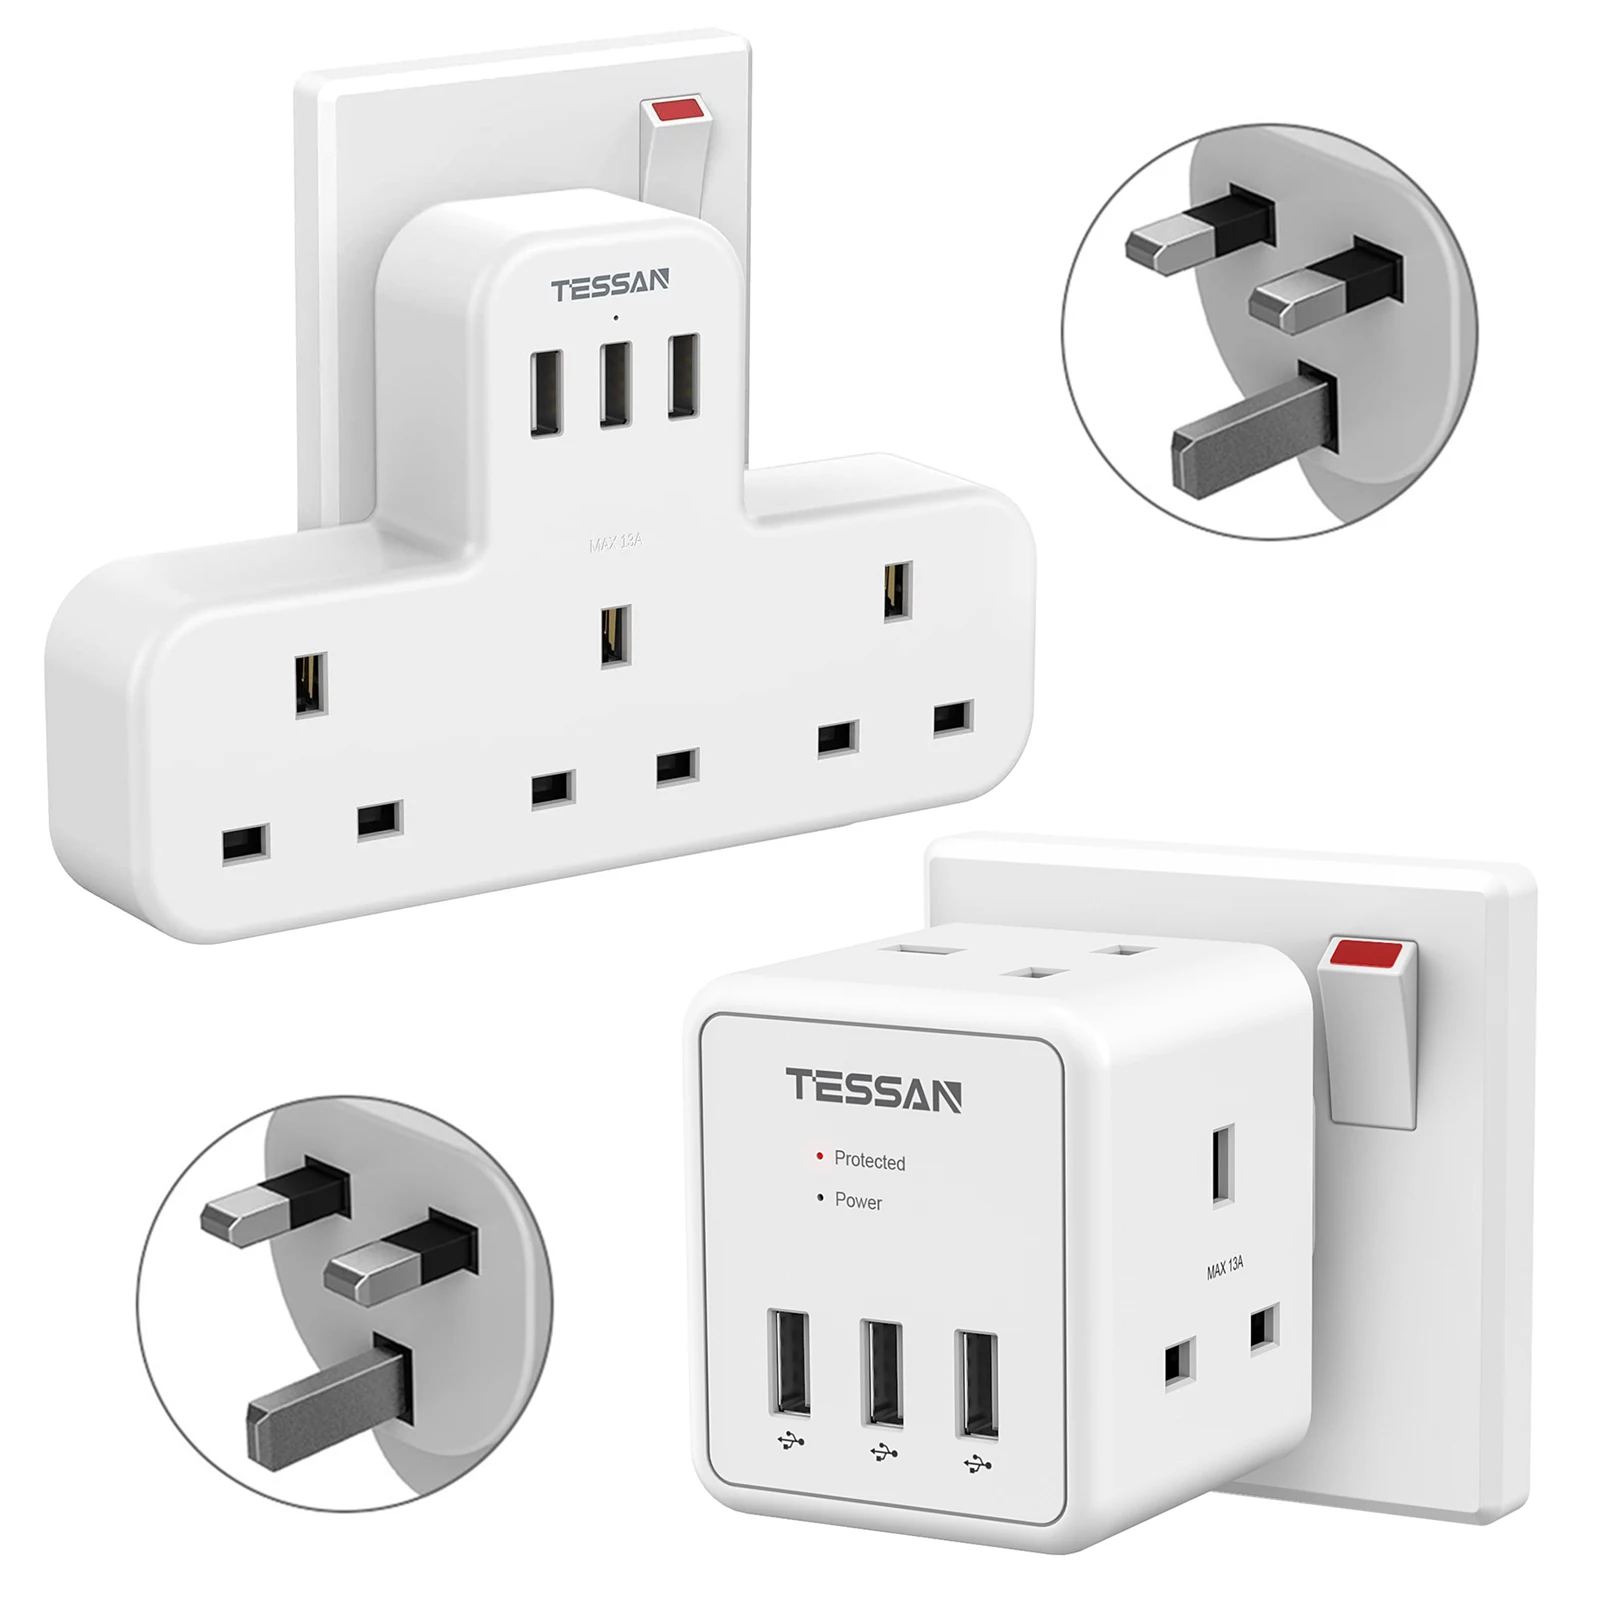 

TESSAN UK Double Plug Adapter, 2-Way Outlets with 3 USB Surge Protection, 13A Cube Multi Plug Extension Wall Socket for Home